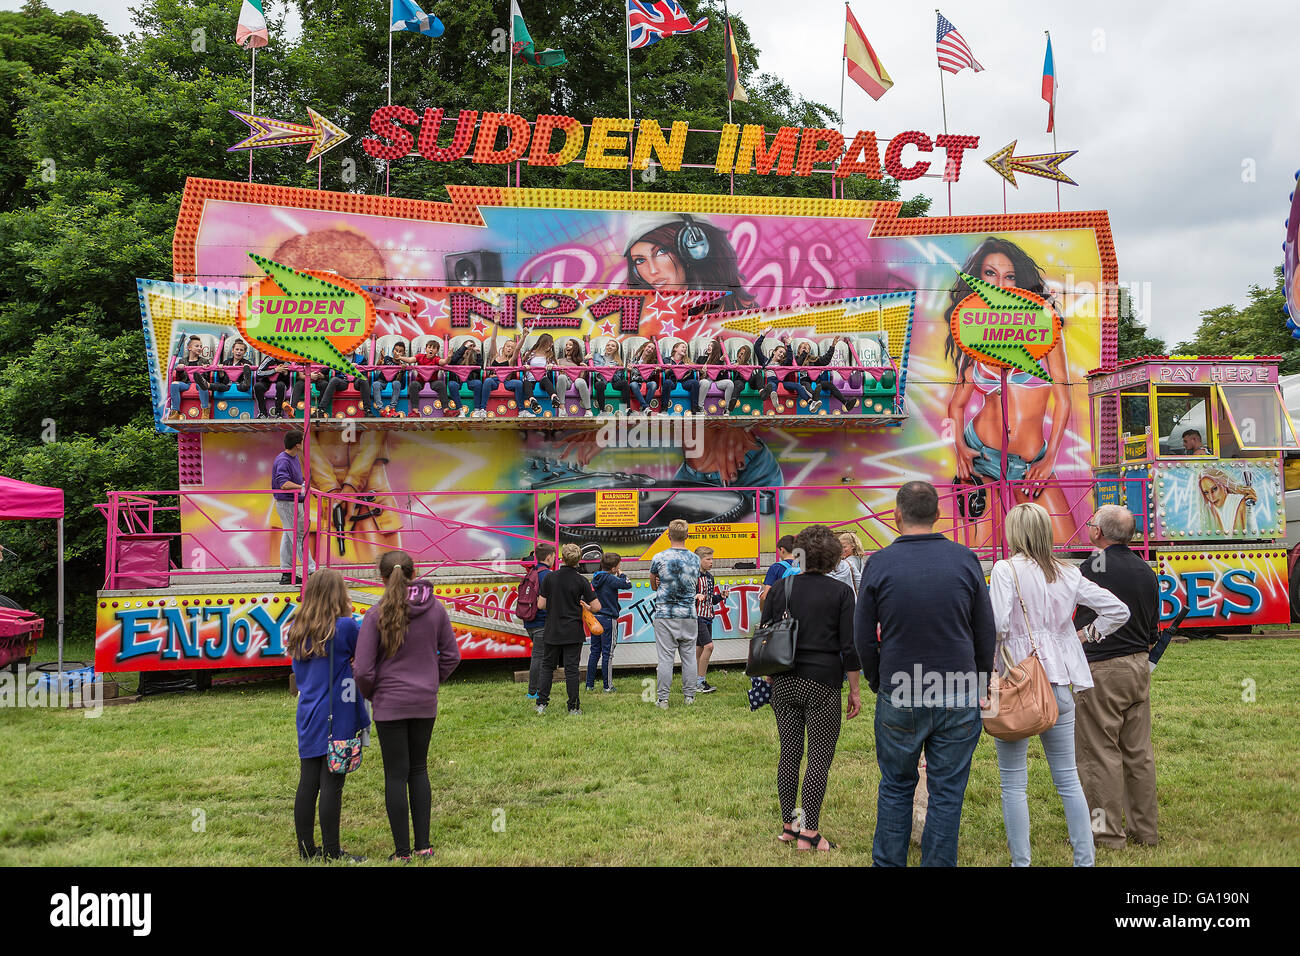 Sudden Impact fairground ride in action with people standing watching Stock Photo